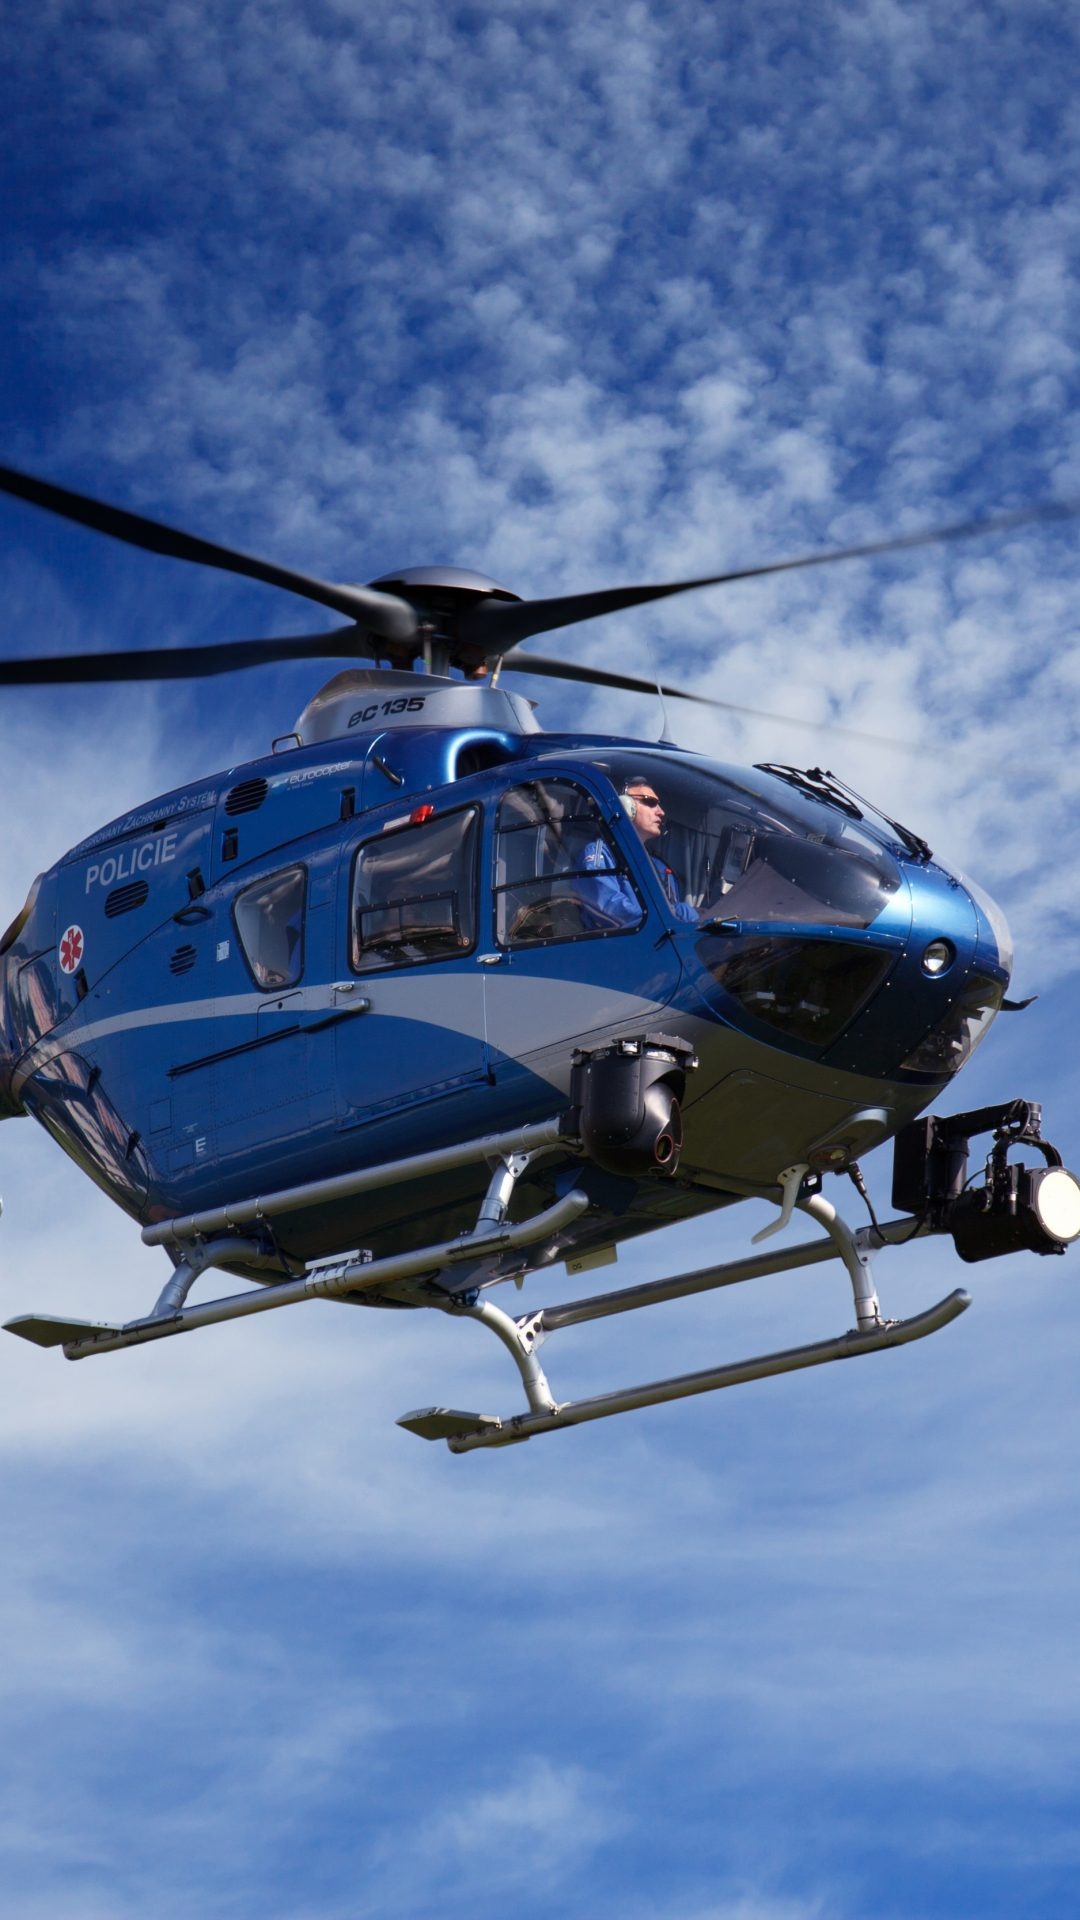 Police helicopter, High-flying thrill, Aerial surveillance, Urban skies, 1080x1920 Full HD Handy